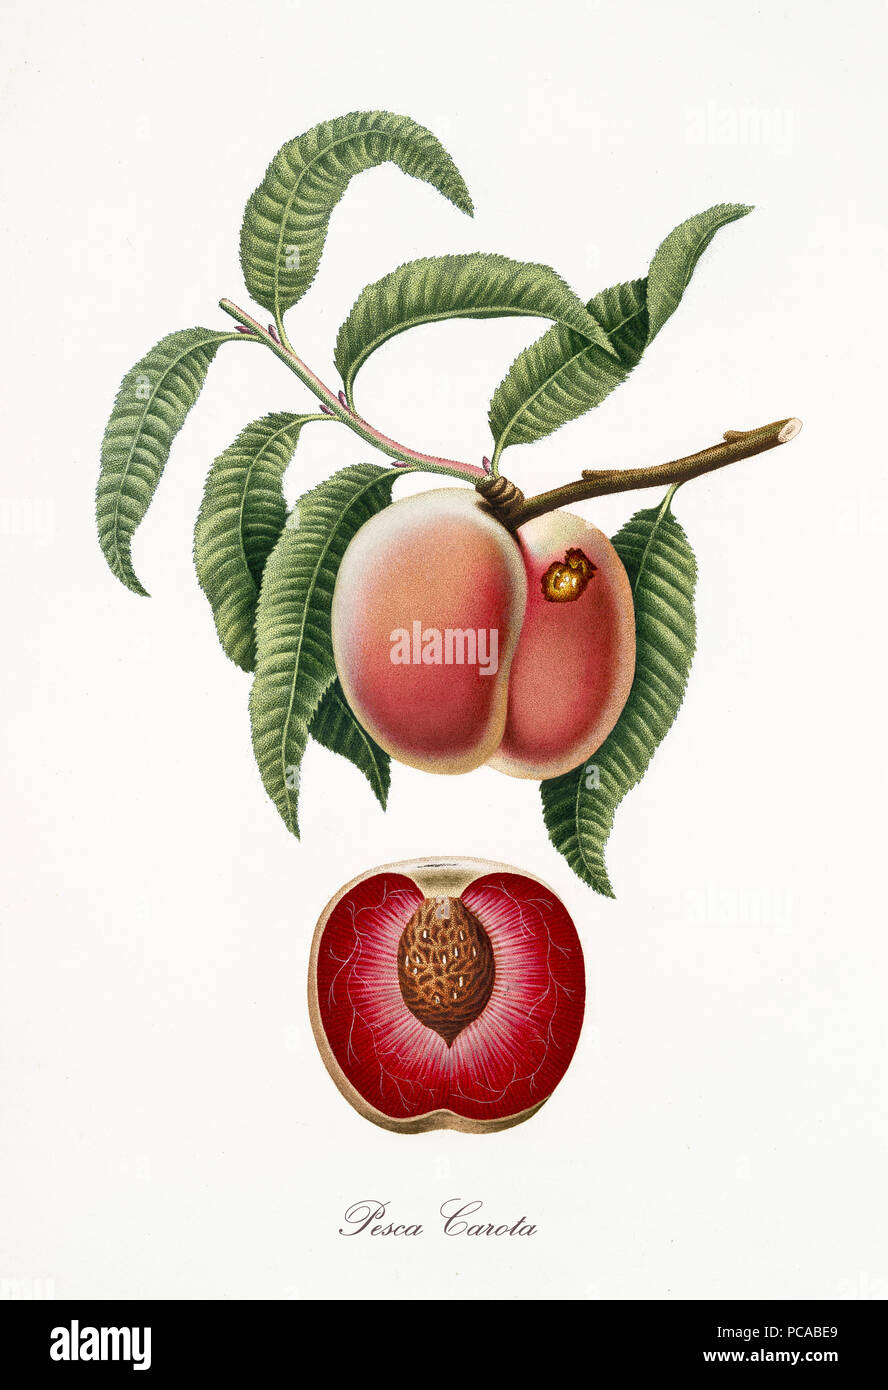 Peach, known also as carrot peach, peach tree leaves and fruit section with kernel isolated on white background. Old botanical detailed illustration By Giorgio Gallesio publ. 1817, 1839 Pisa Italy Stock Photo